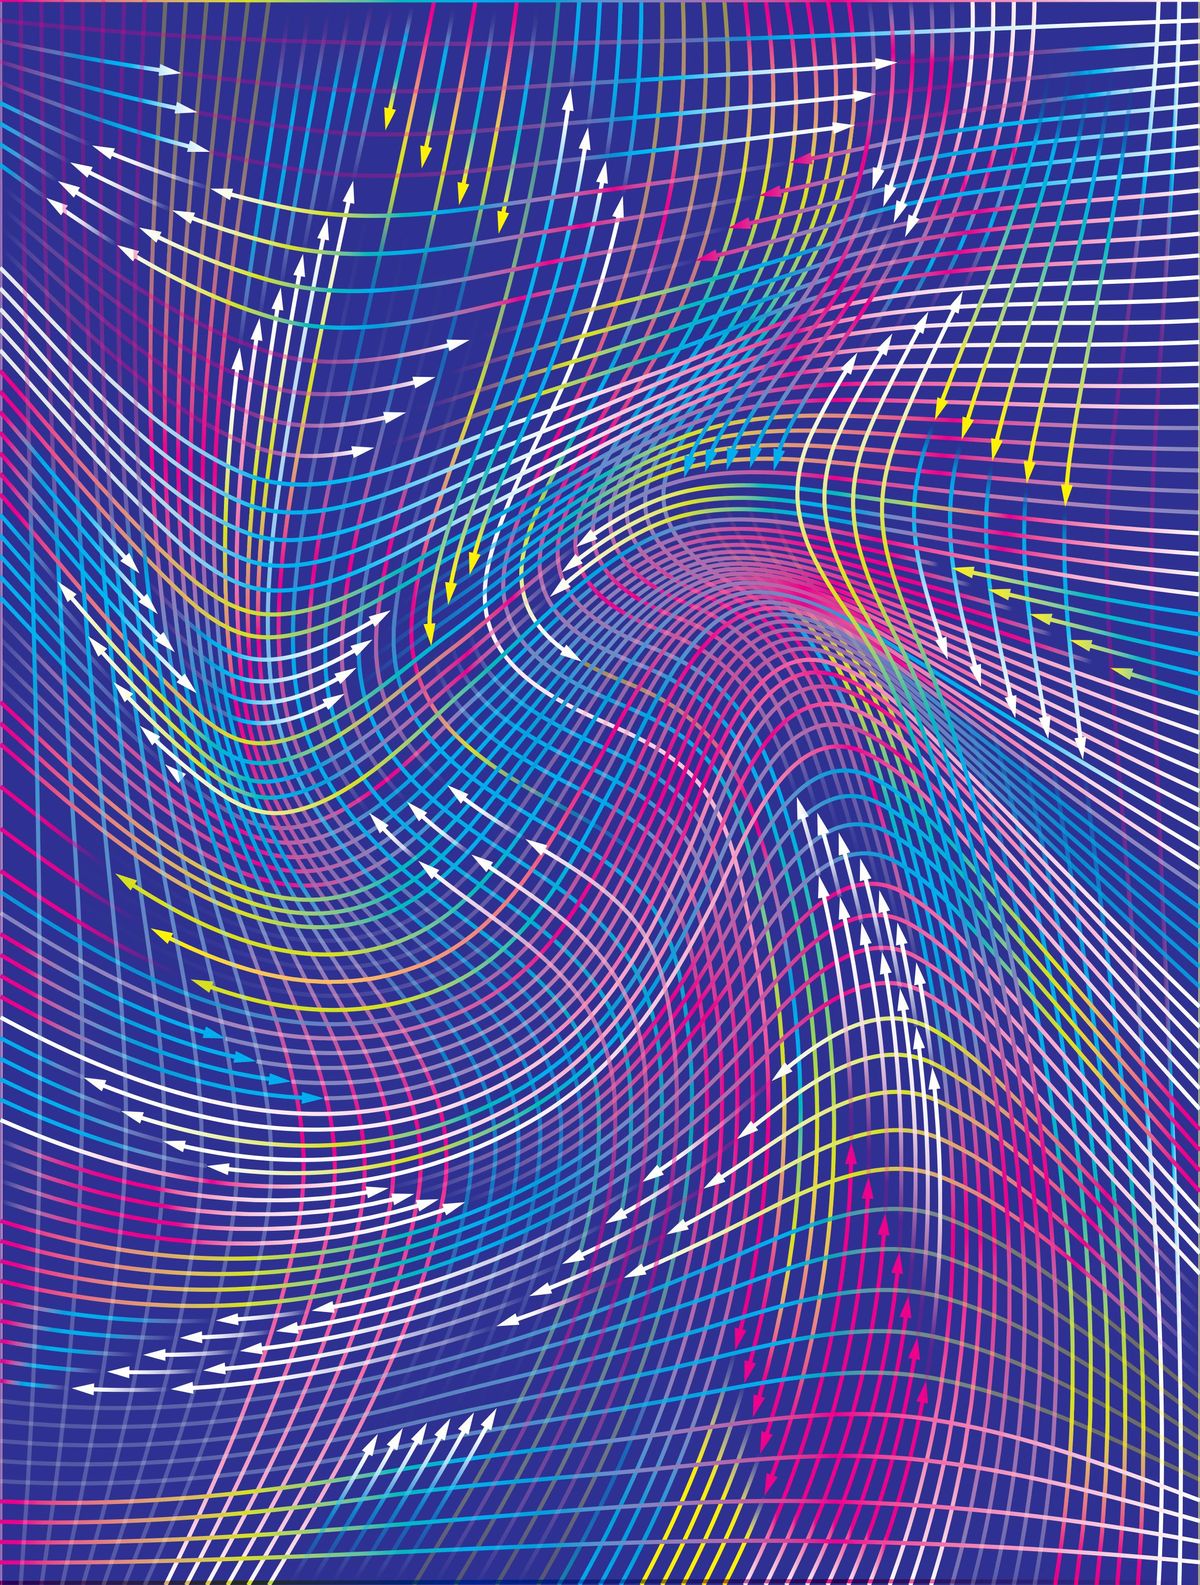 A pattern of wavy lines and arrows with a number of colors over a blue background